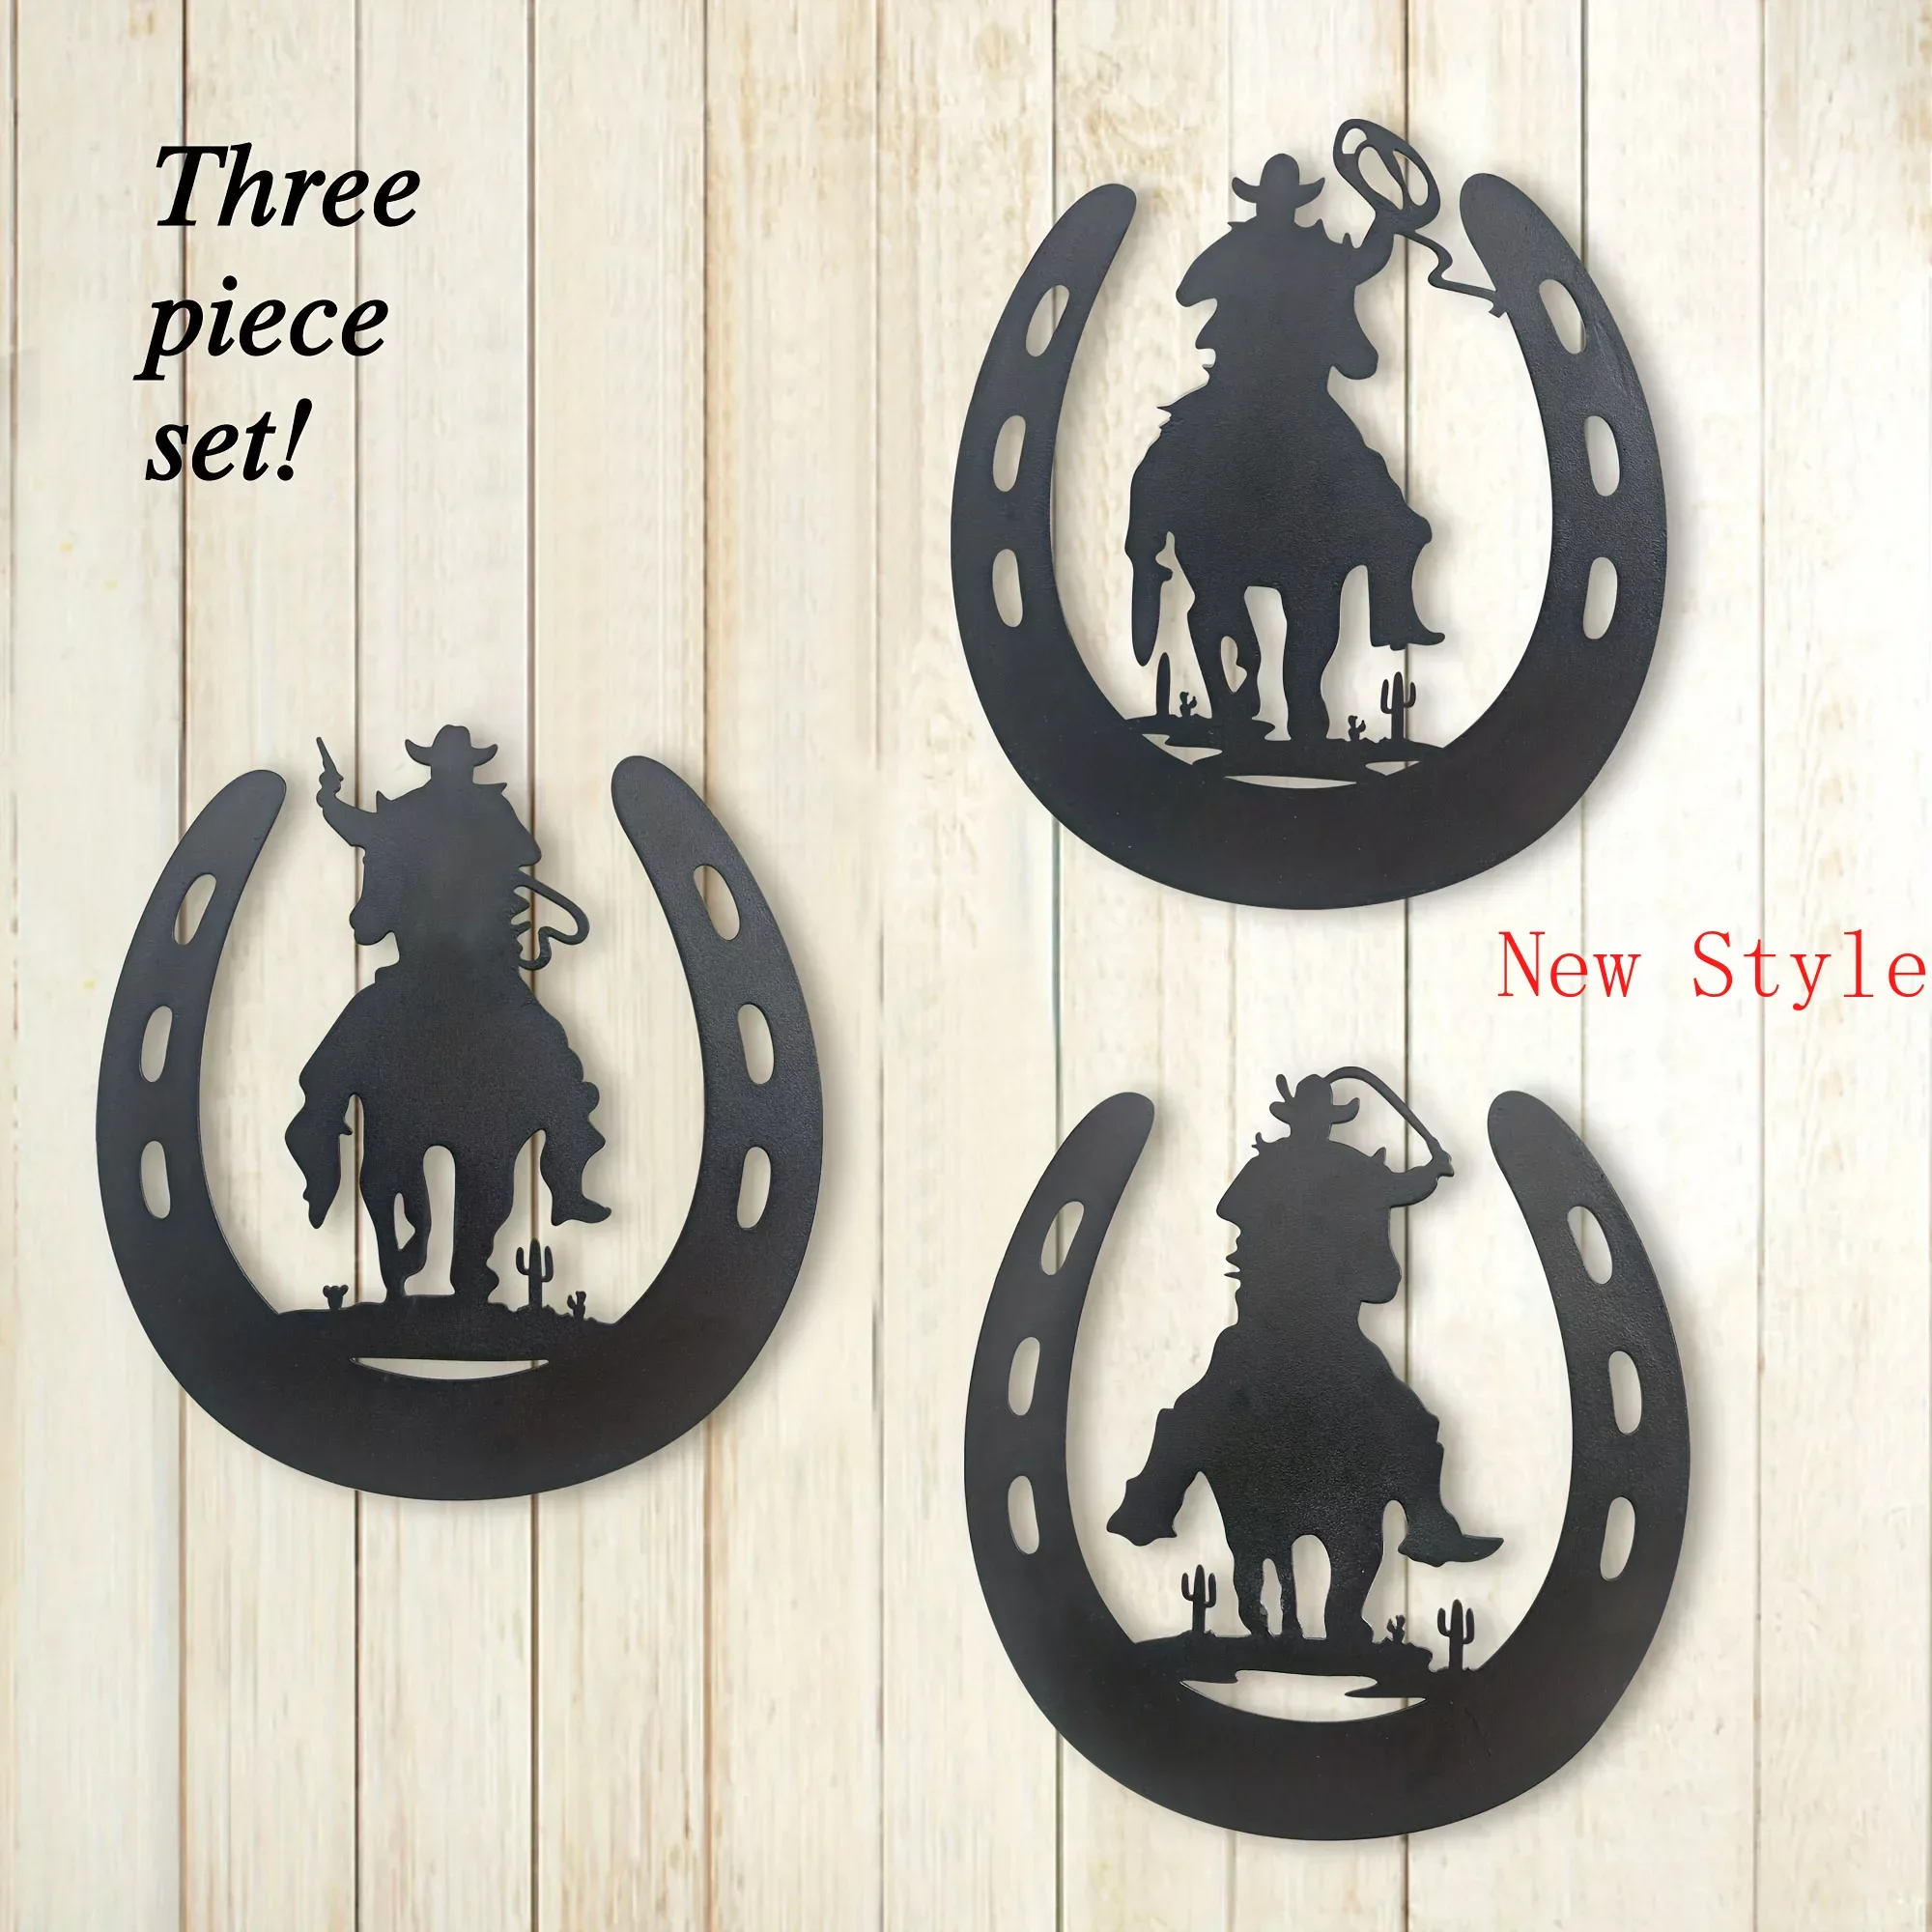 

Horseshoe Metal Home Art Decor with Cowboy Western Rustic Style Horse Shoes Decoration Wall Hanging Living Room Country Decor Ho